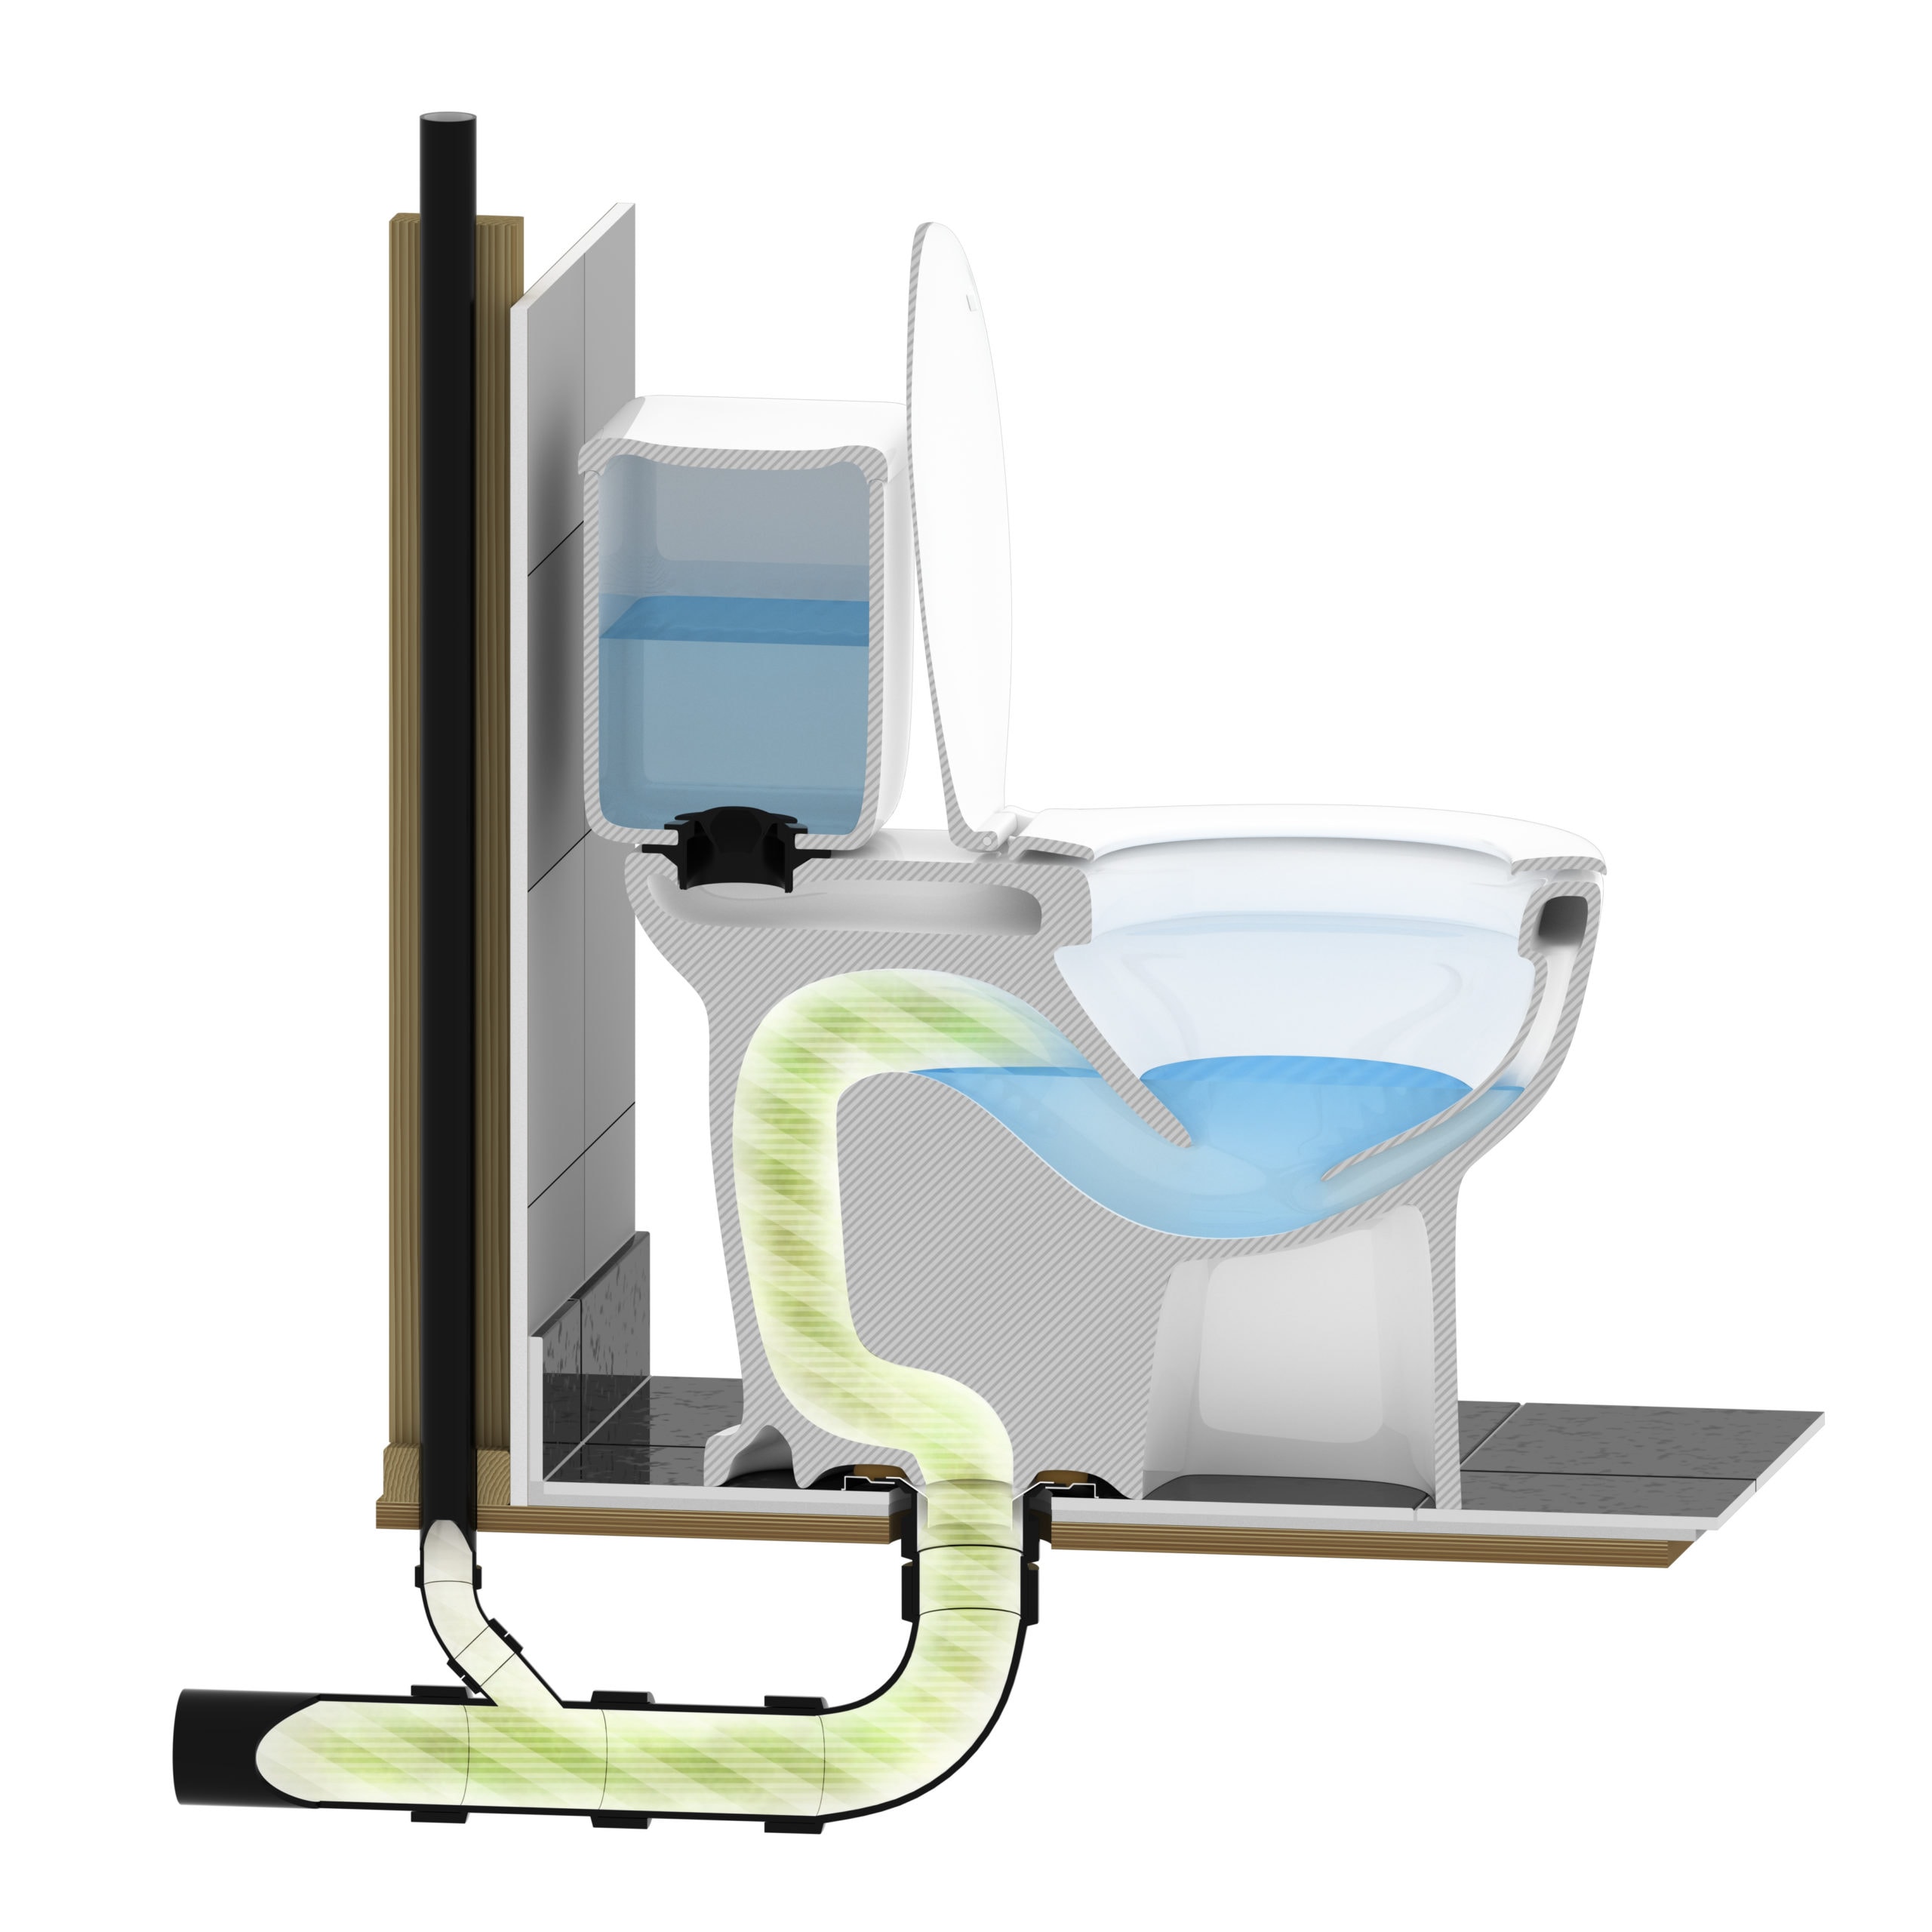 Cutaway illustration showing sewer gas contained within waste and roof vent pipes by water in toilet trap